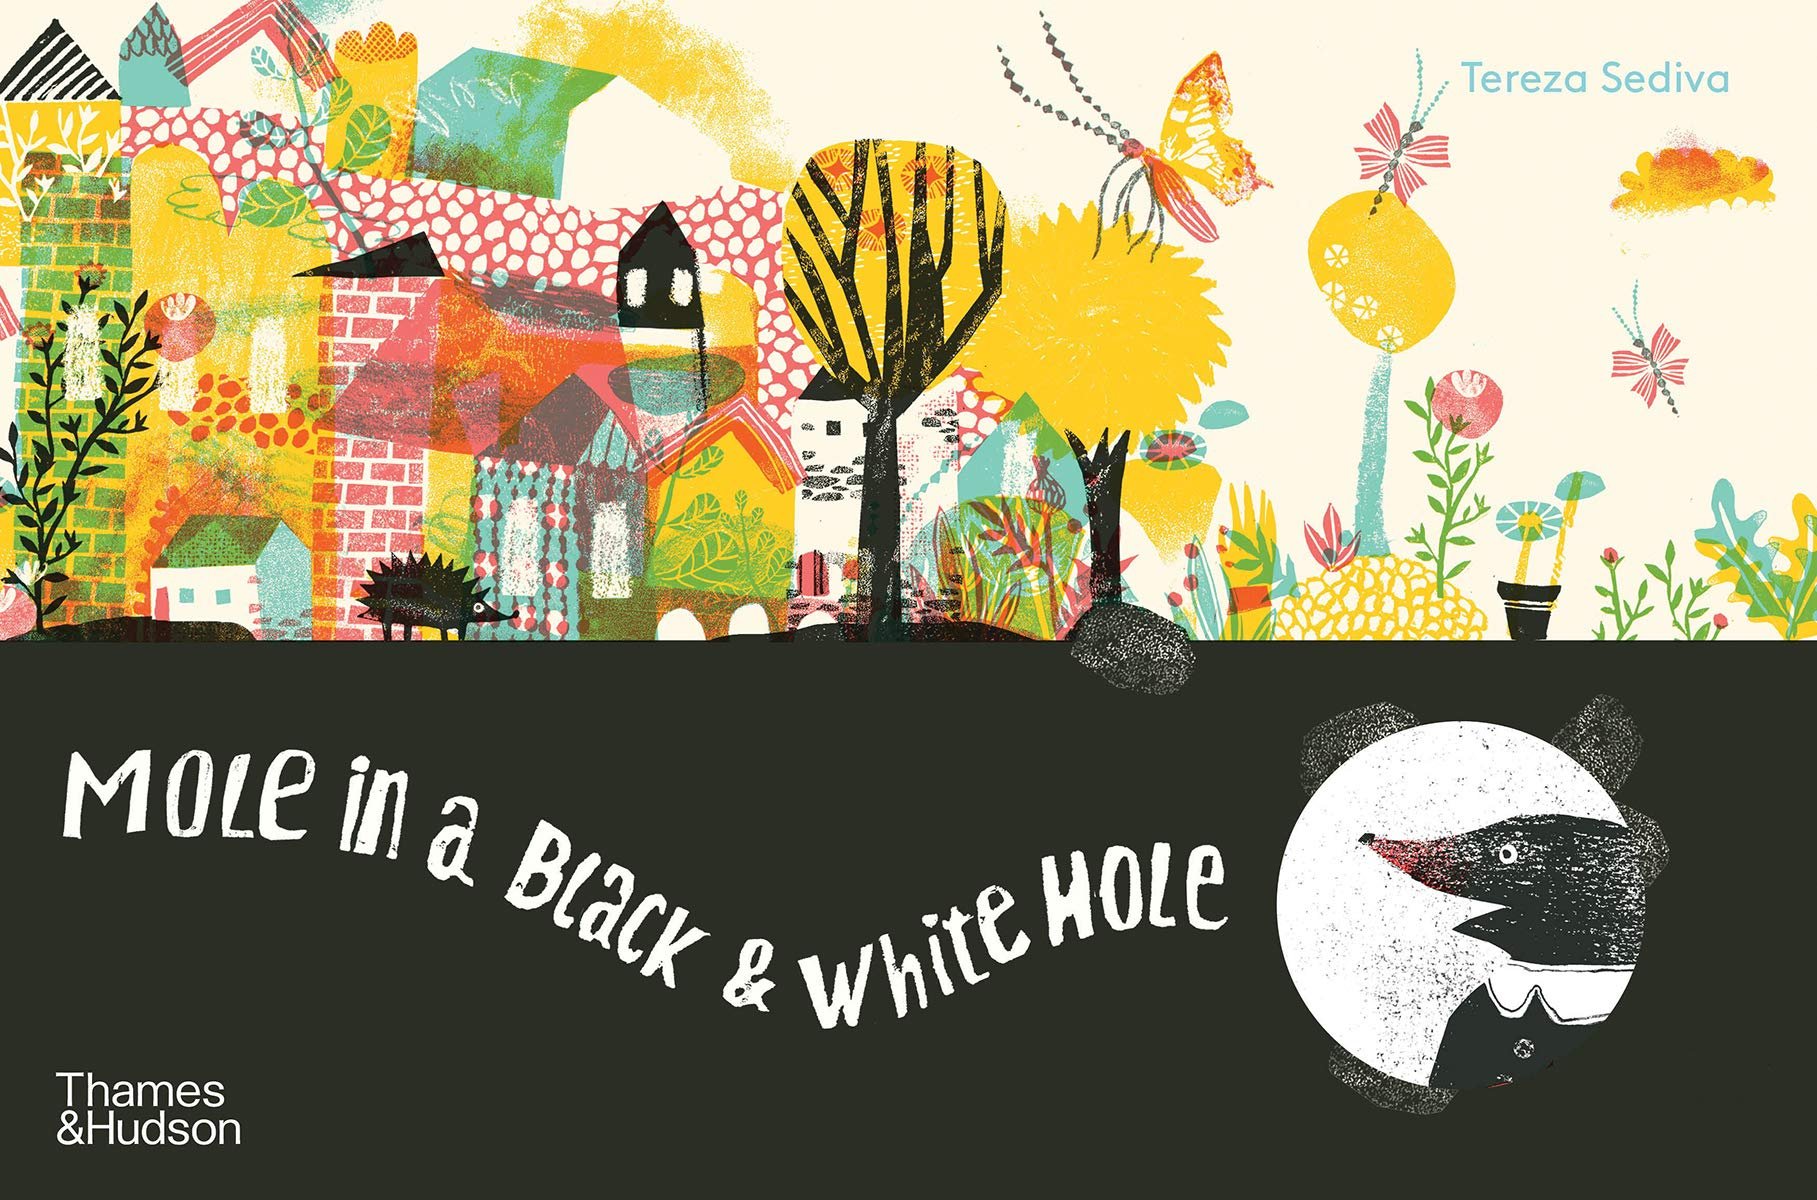 (Eng) Mole in a Black & White Hole / Hardcover – Illustrated March 2, 2021 by Tereza Sediva / Thames & Hudson